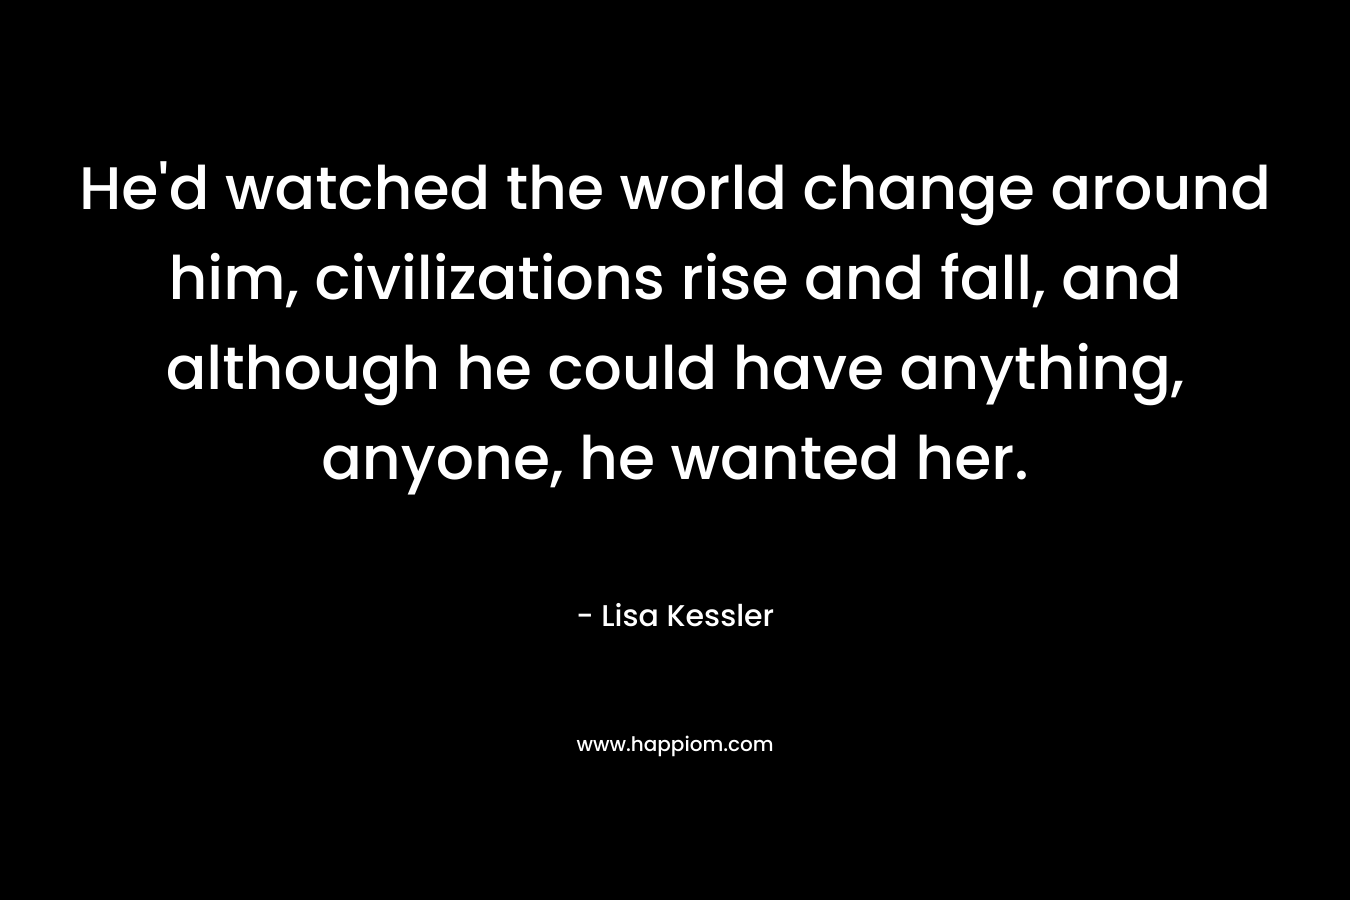 He’d watched the world change around him, civilizations rise and fall, and although he could have anything, anyone, he wanted her. – Lisa Kessler